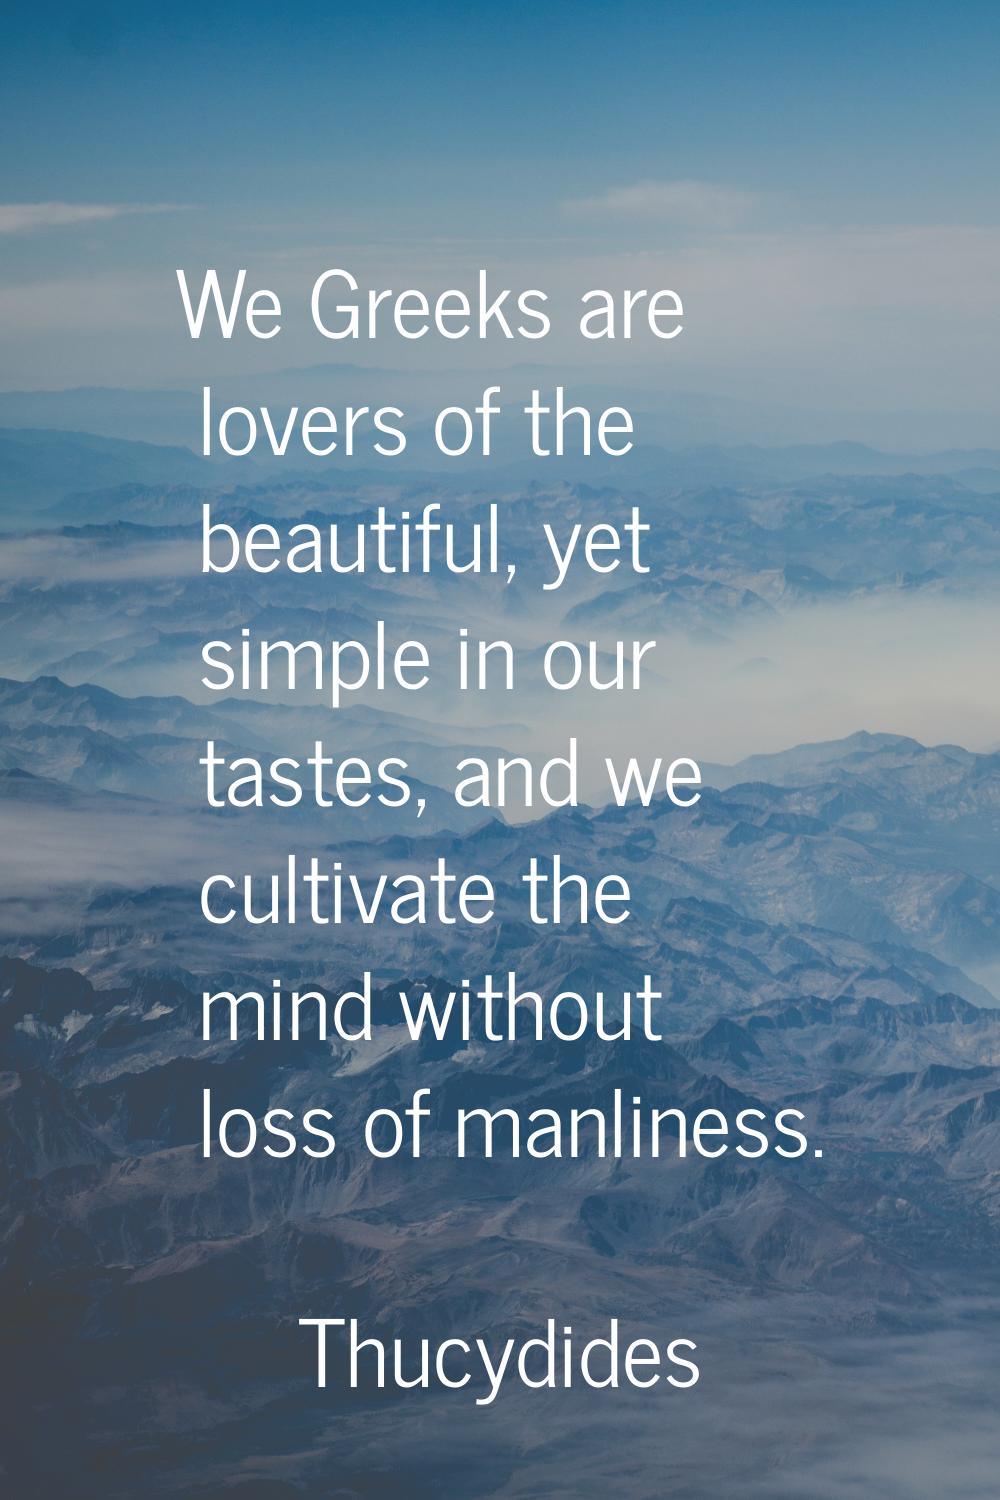 We Greeks are lovers of the beautiful, yet simple in our tastes, and we cultivate the mind without 